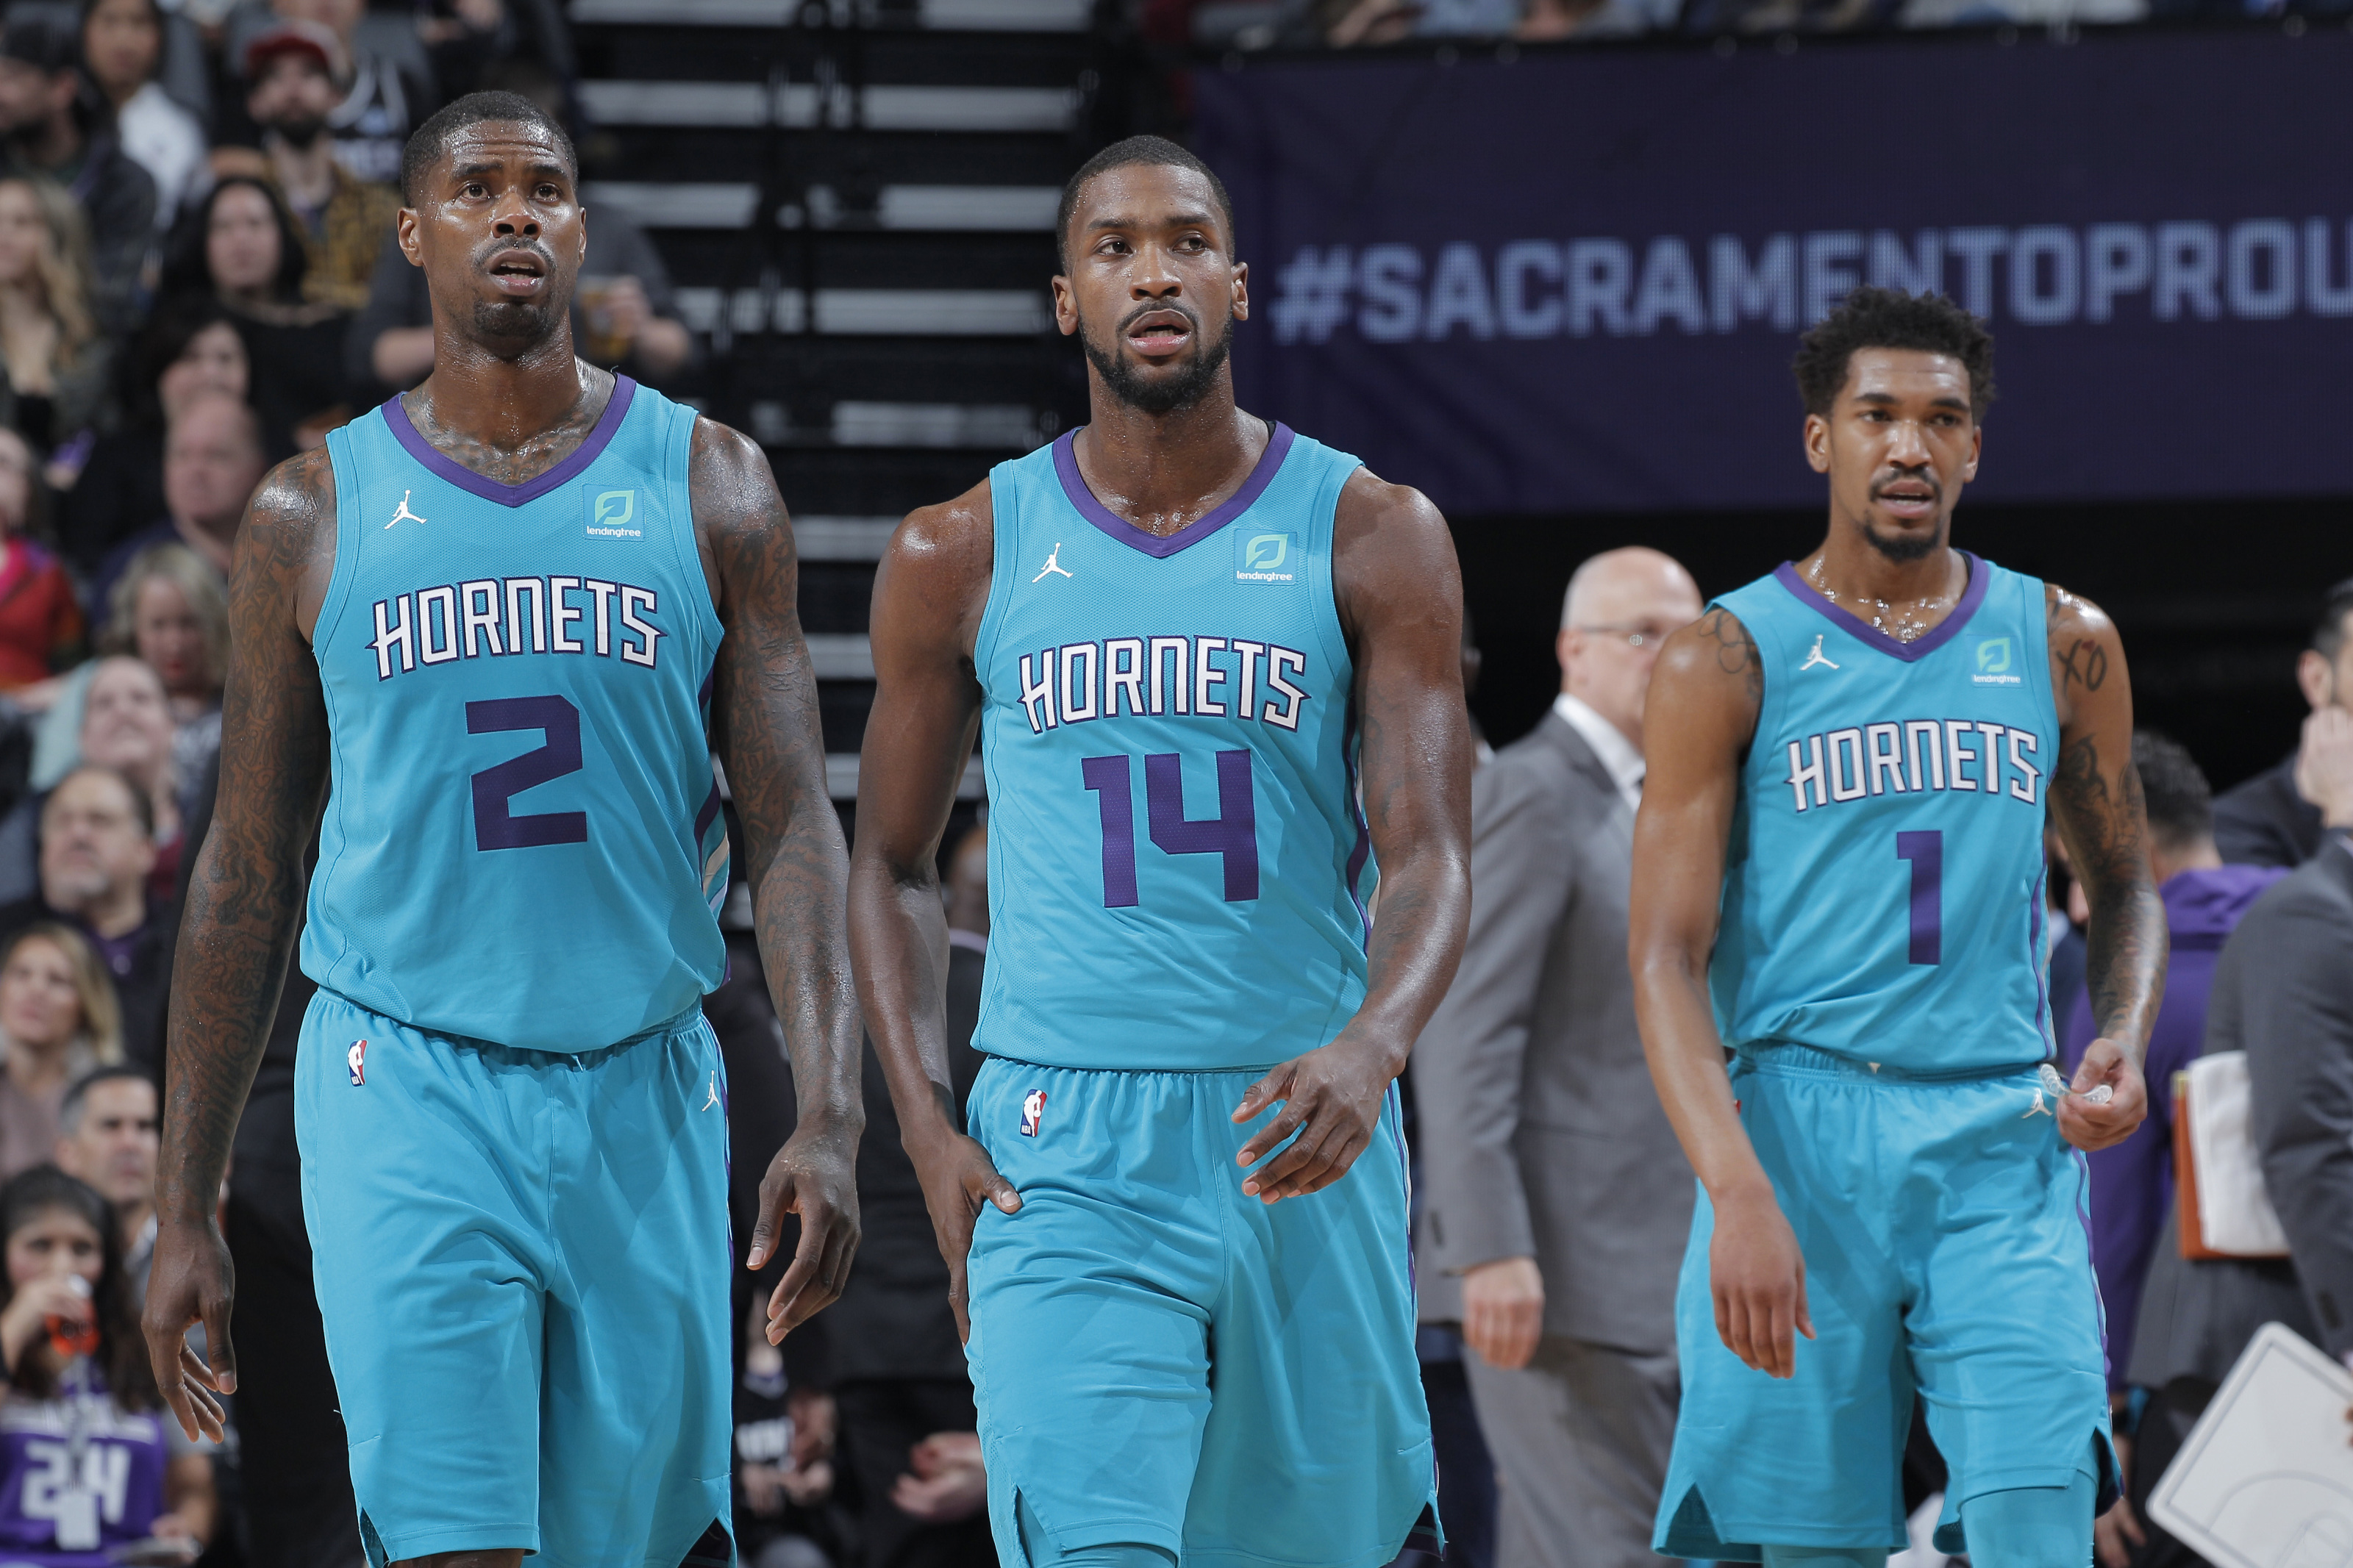 Basketball Forever - The Charlotte Hornets have been really